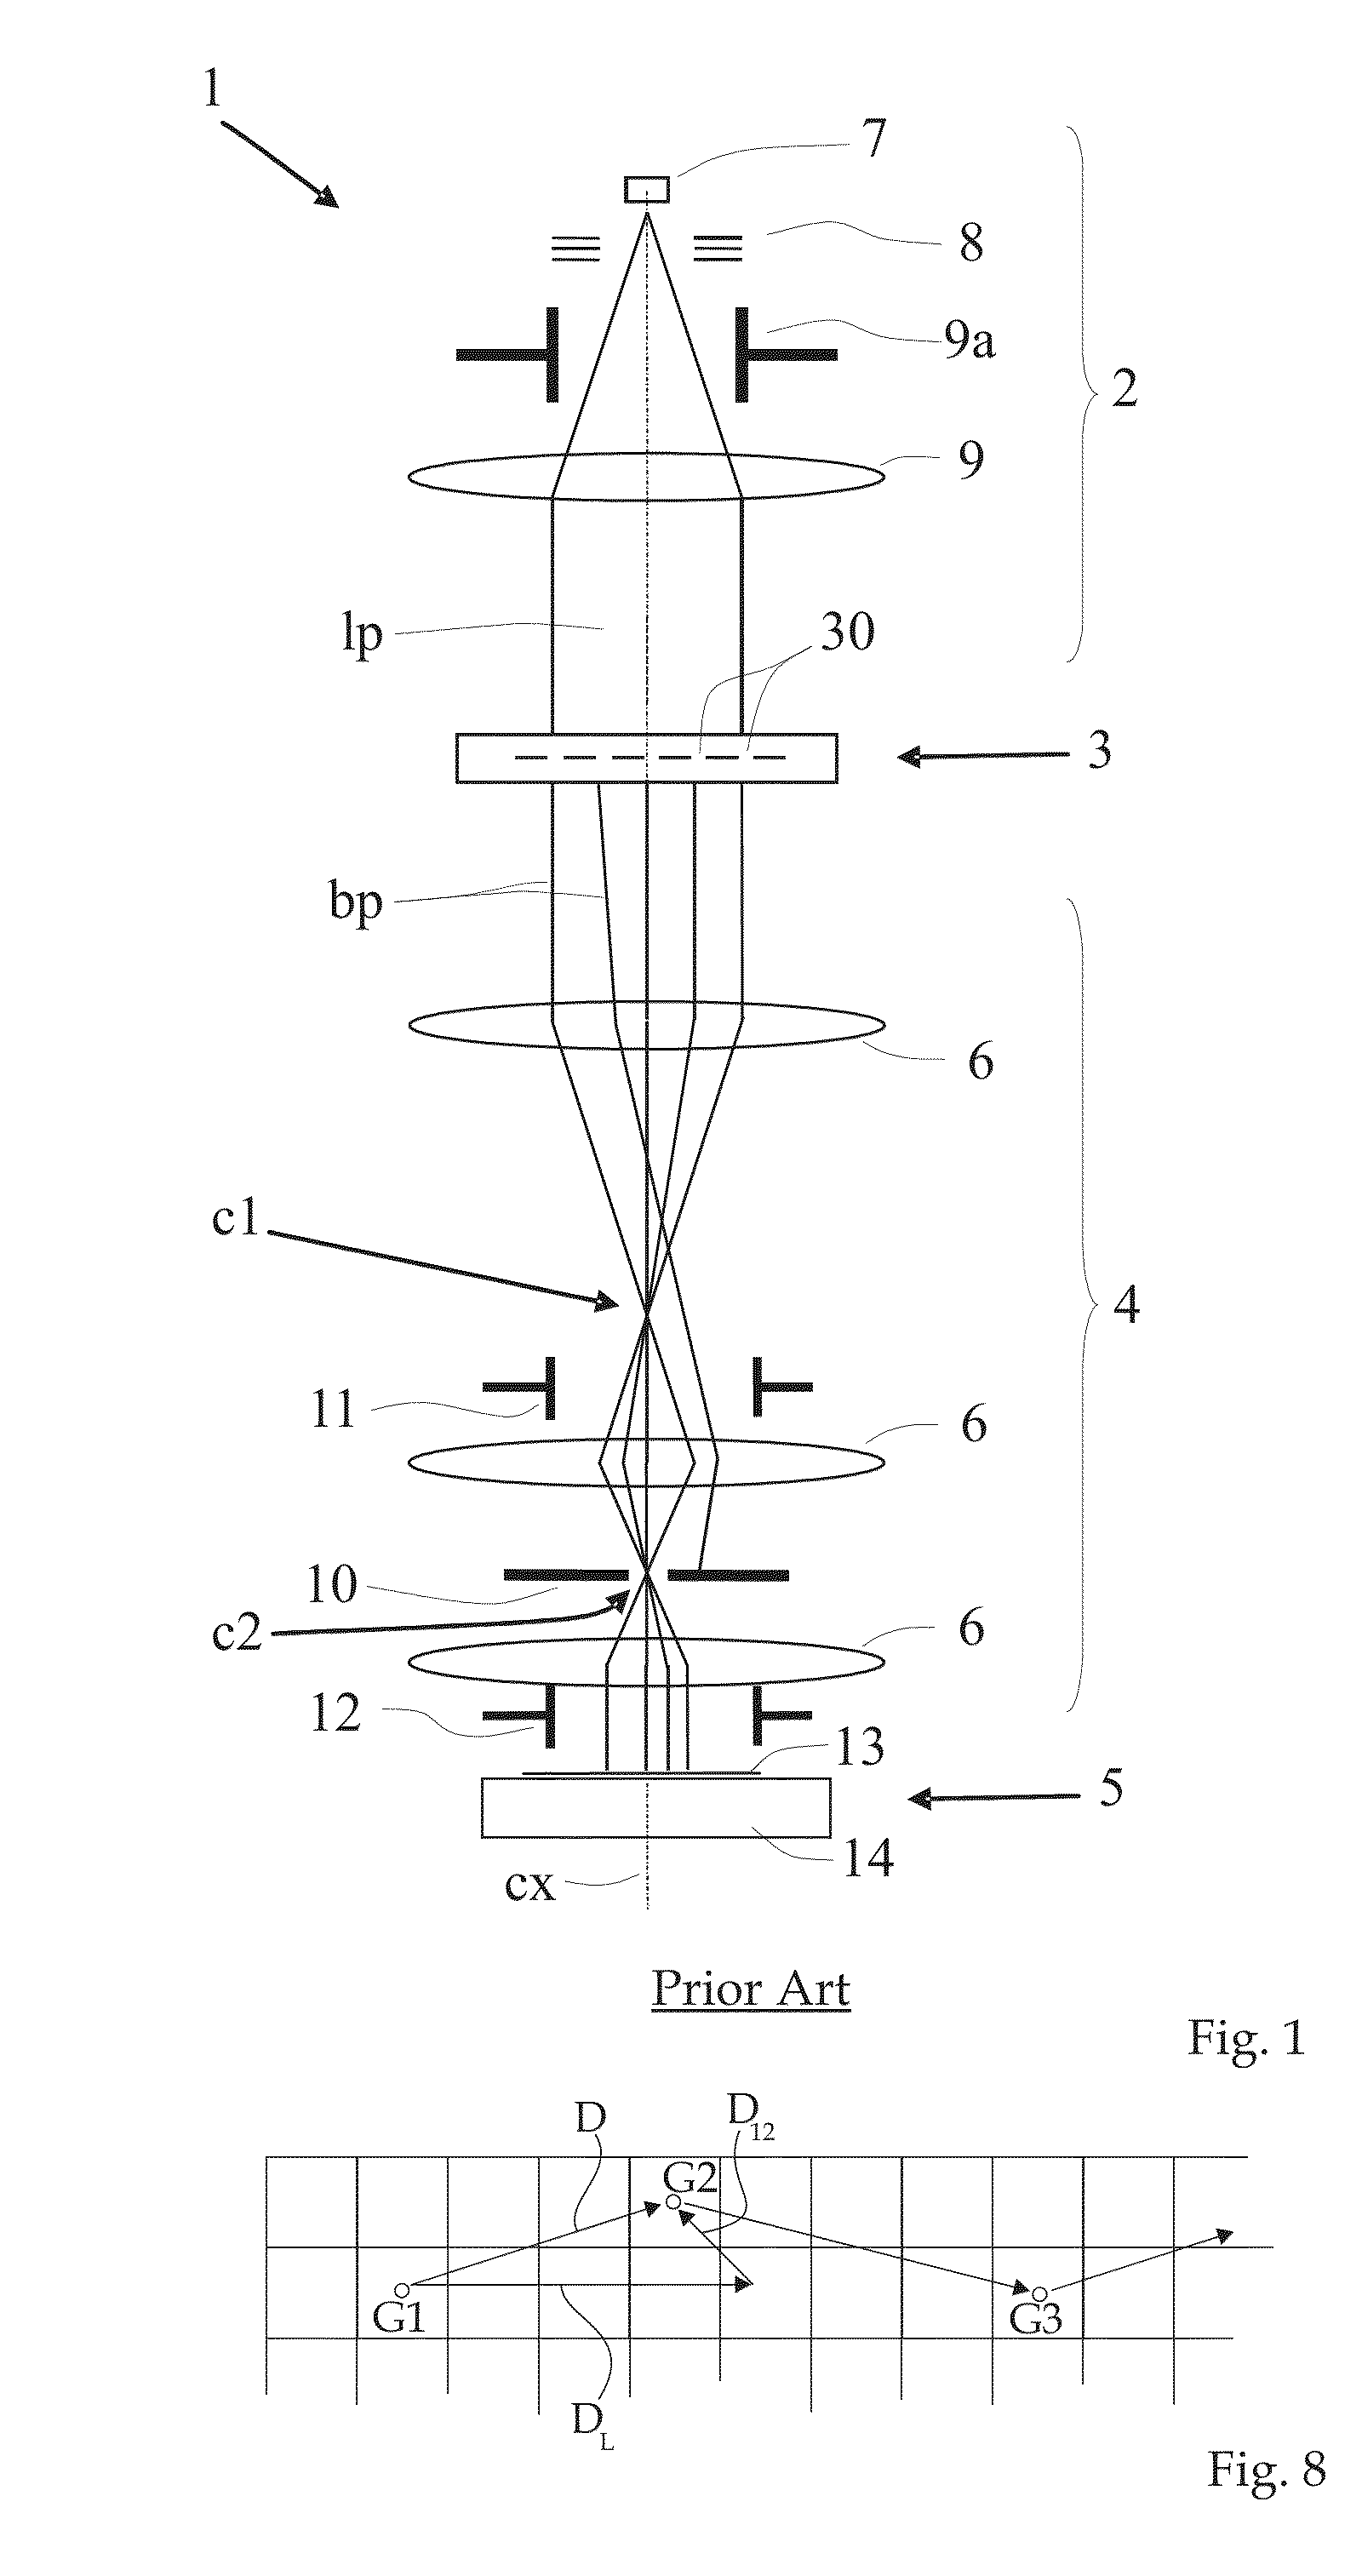 Method for maskless particle-beam exposure